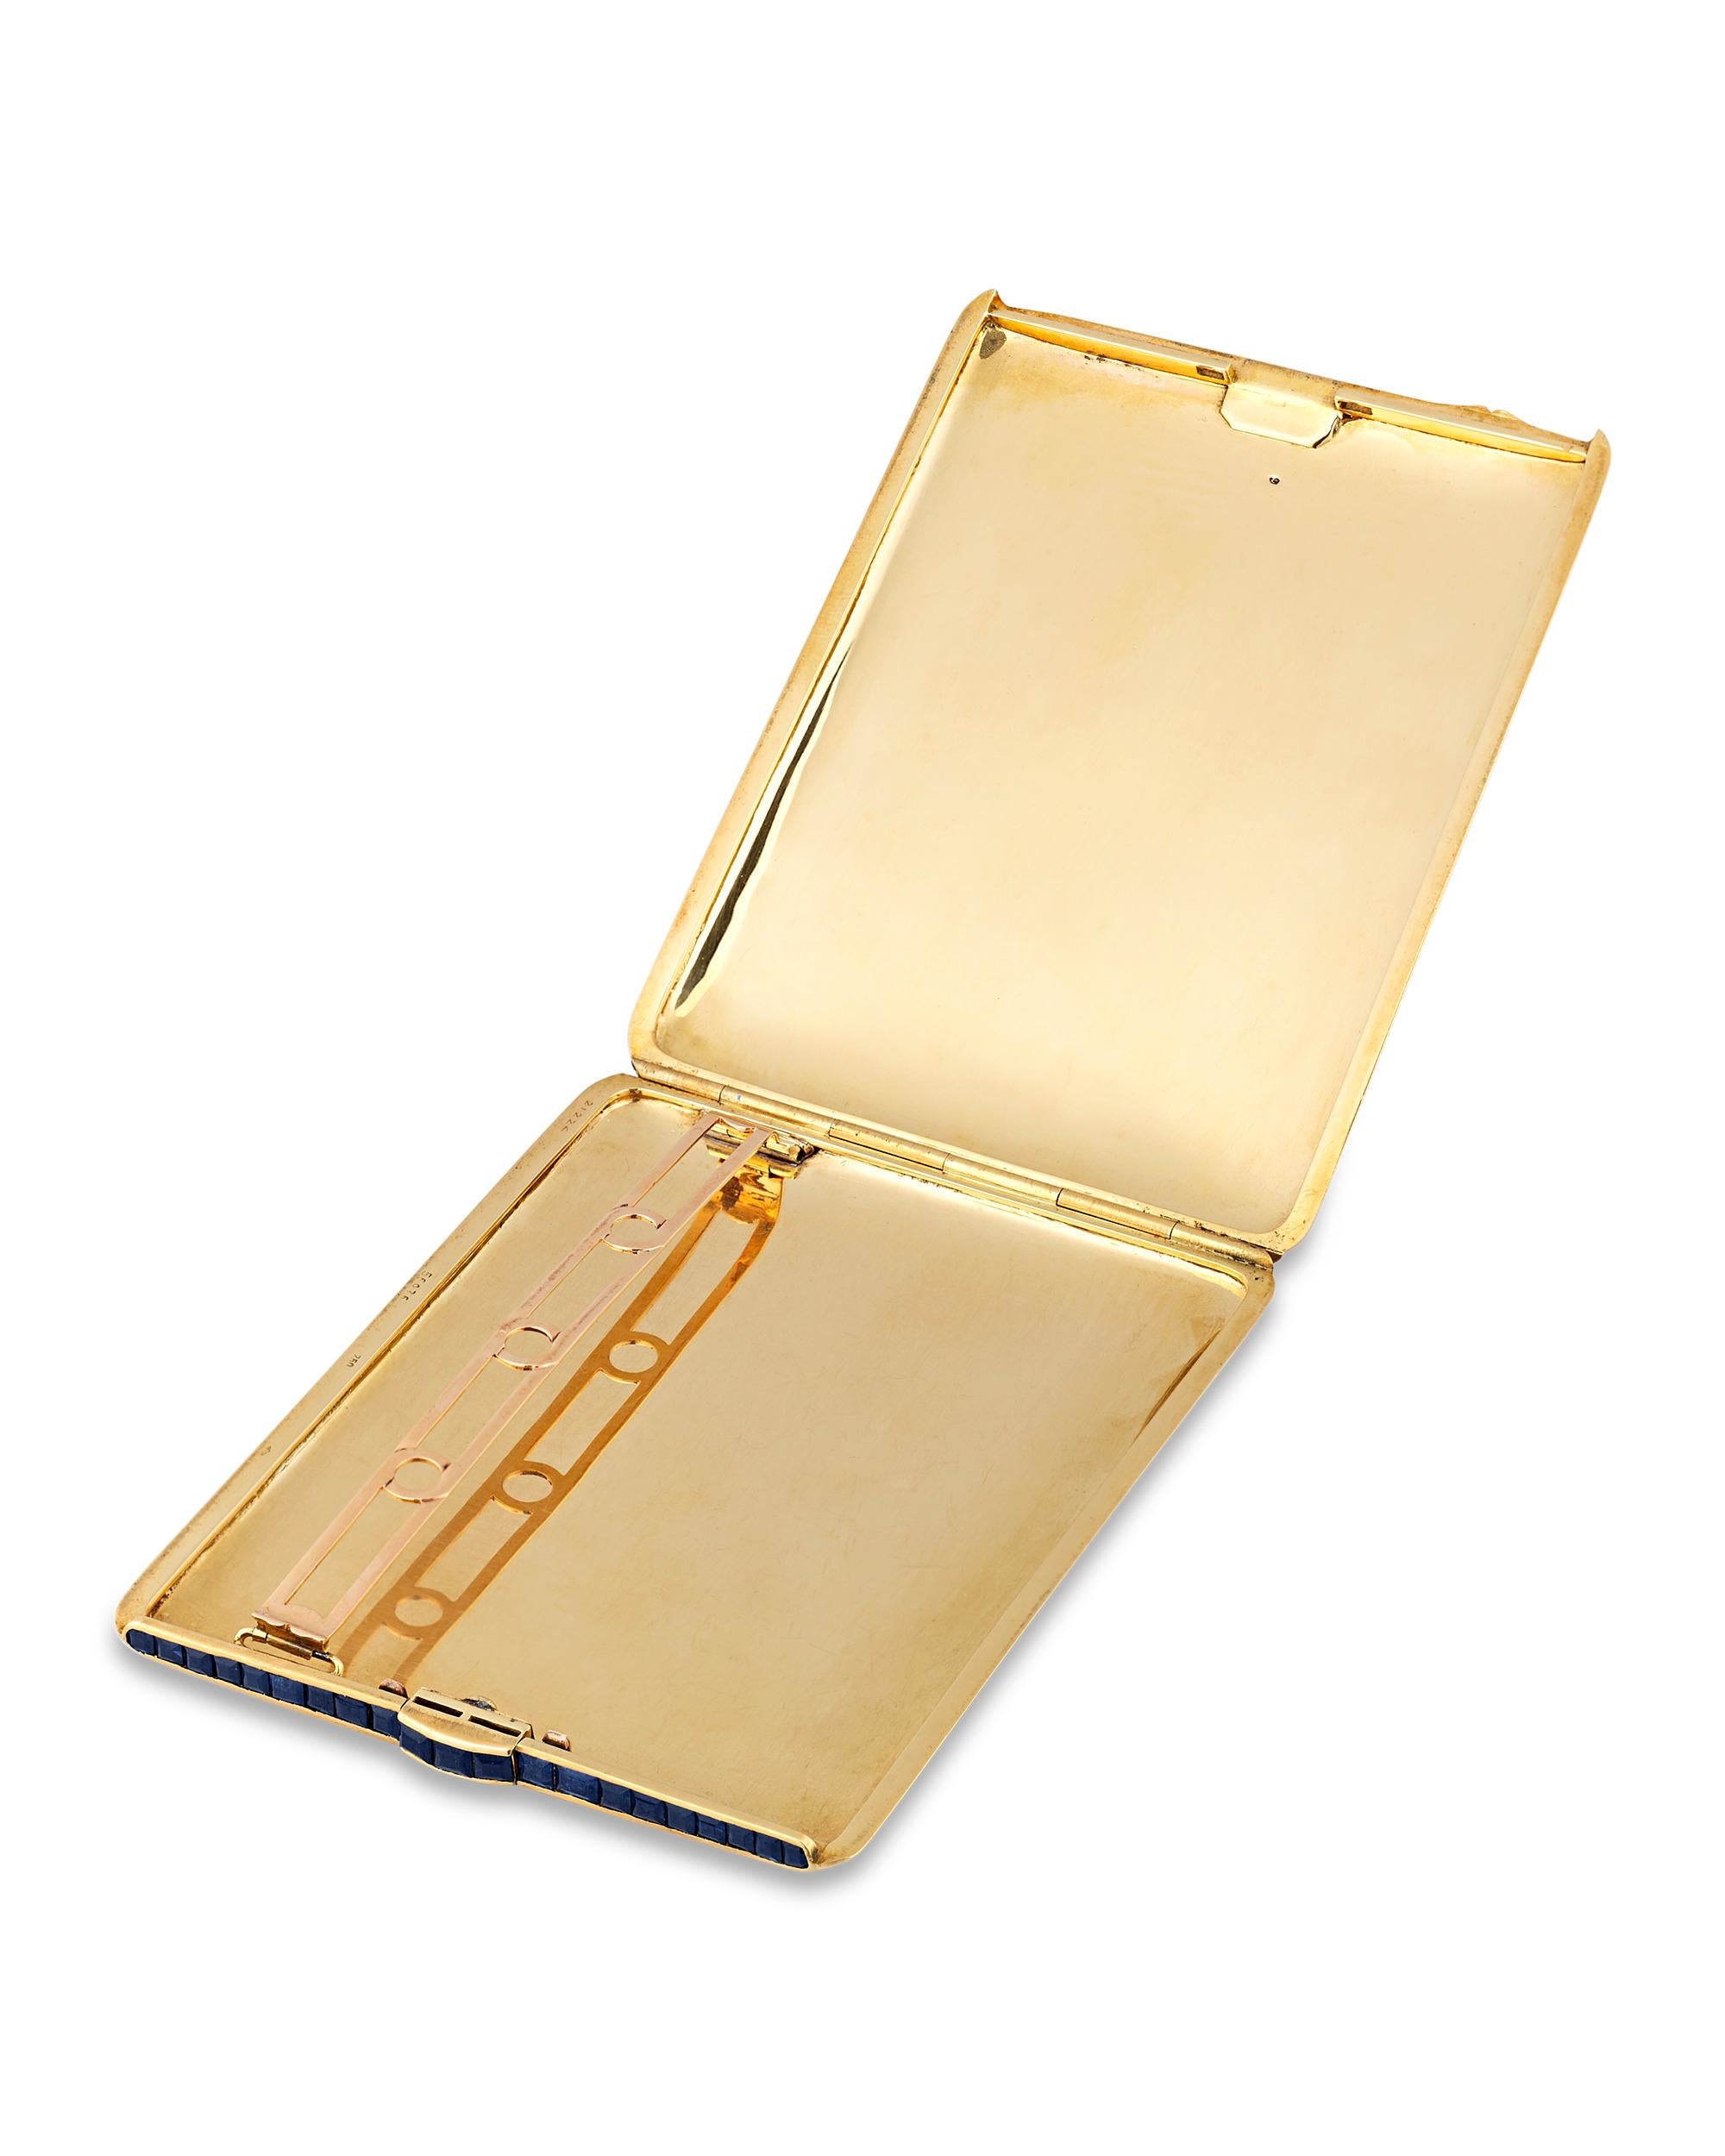 Other French Sapphire and Enamel Cigarette Case For Sale